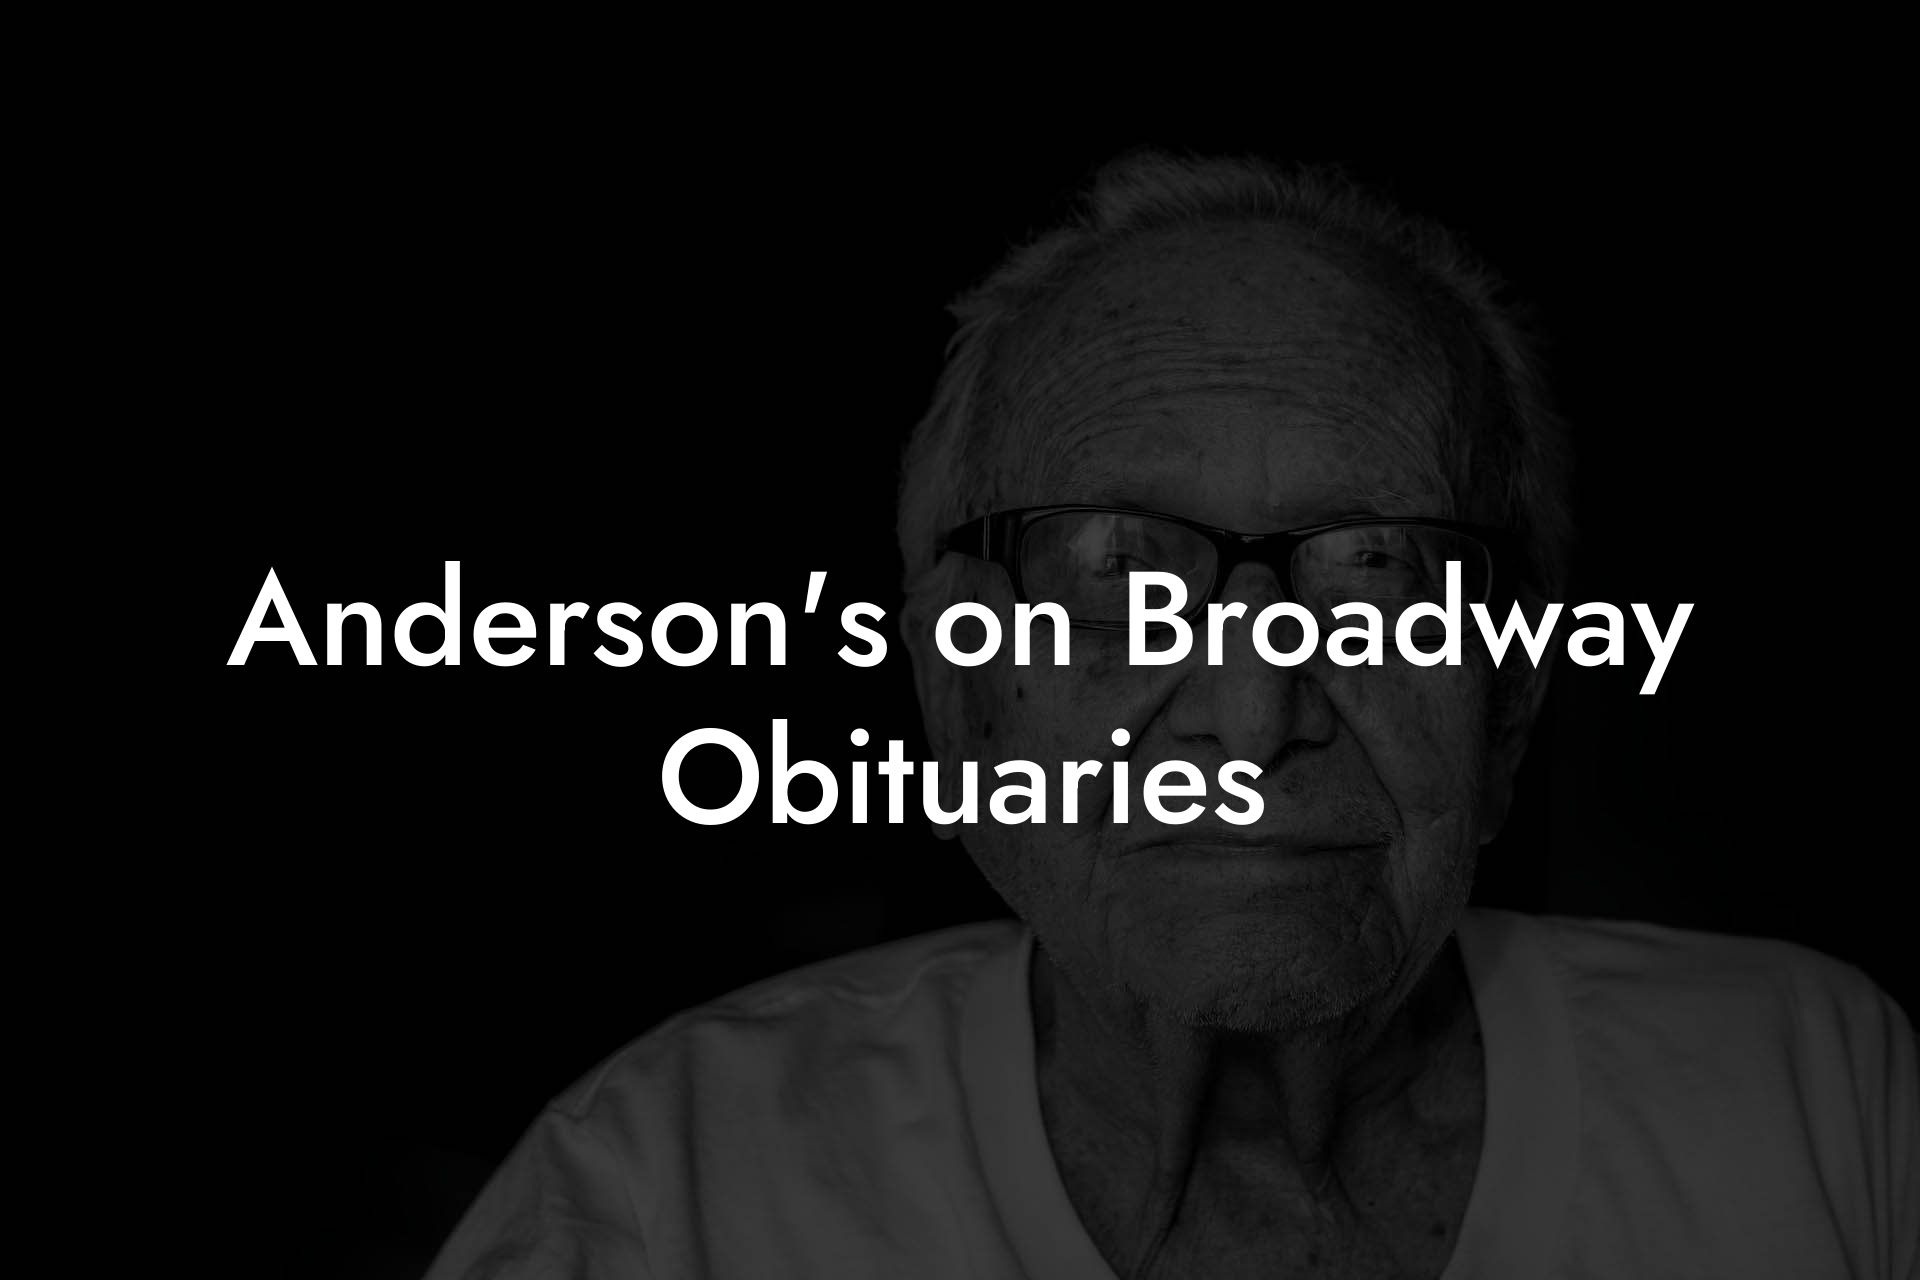 Anderson's on Broadway Obituaries